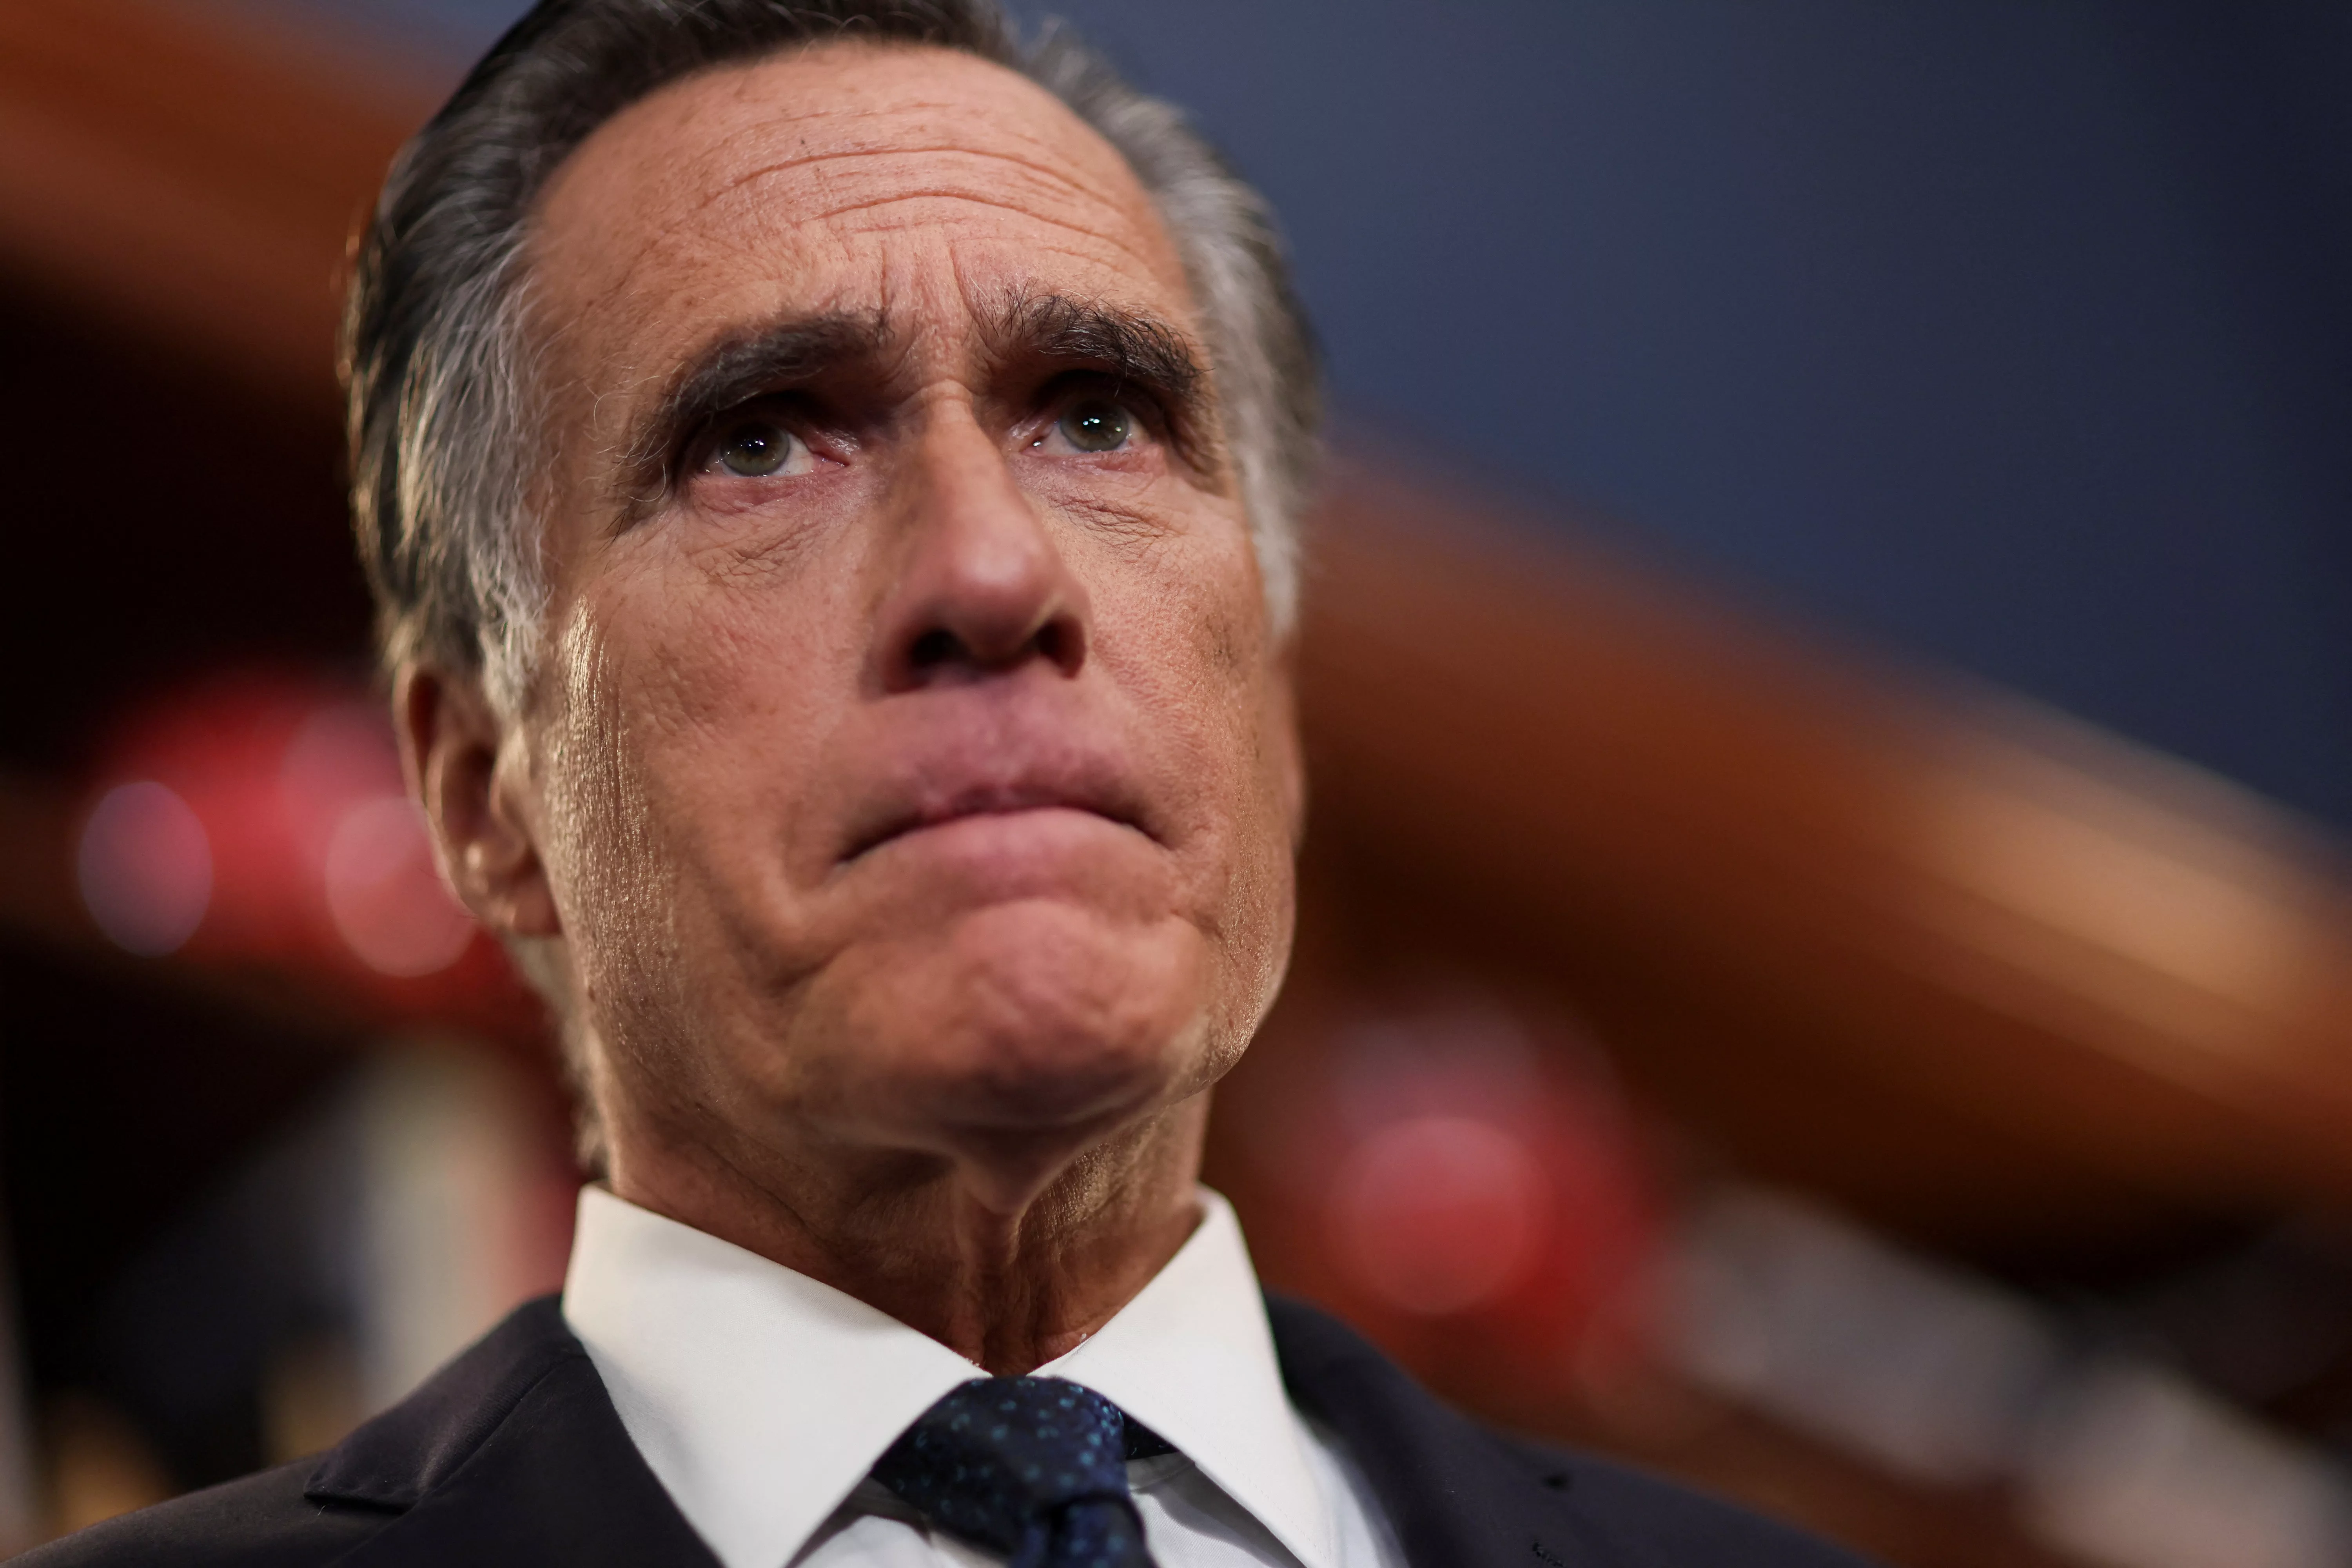 u-s-senator-mitt-romney-r-ut-faces-reporters-during-news-conference-on-capitol-hill-in-washington